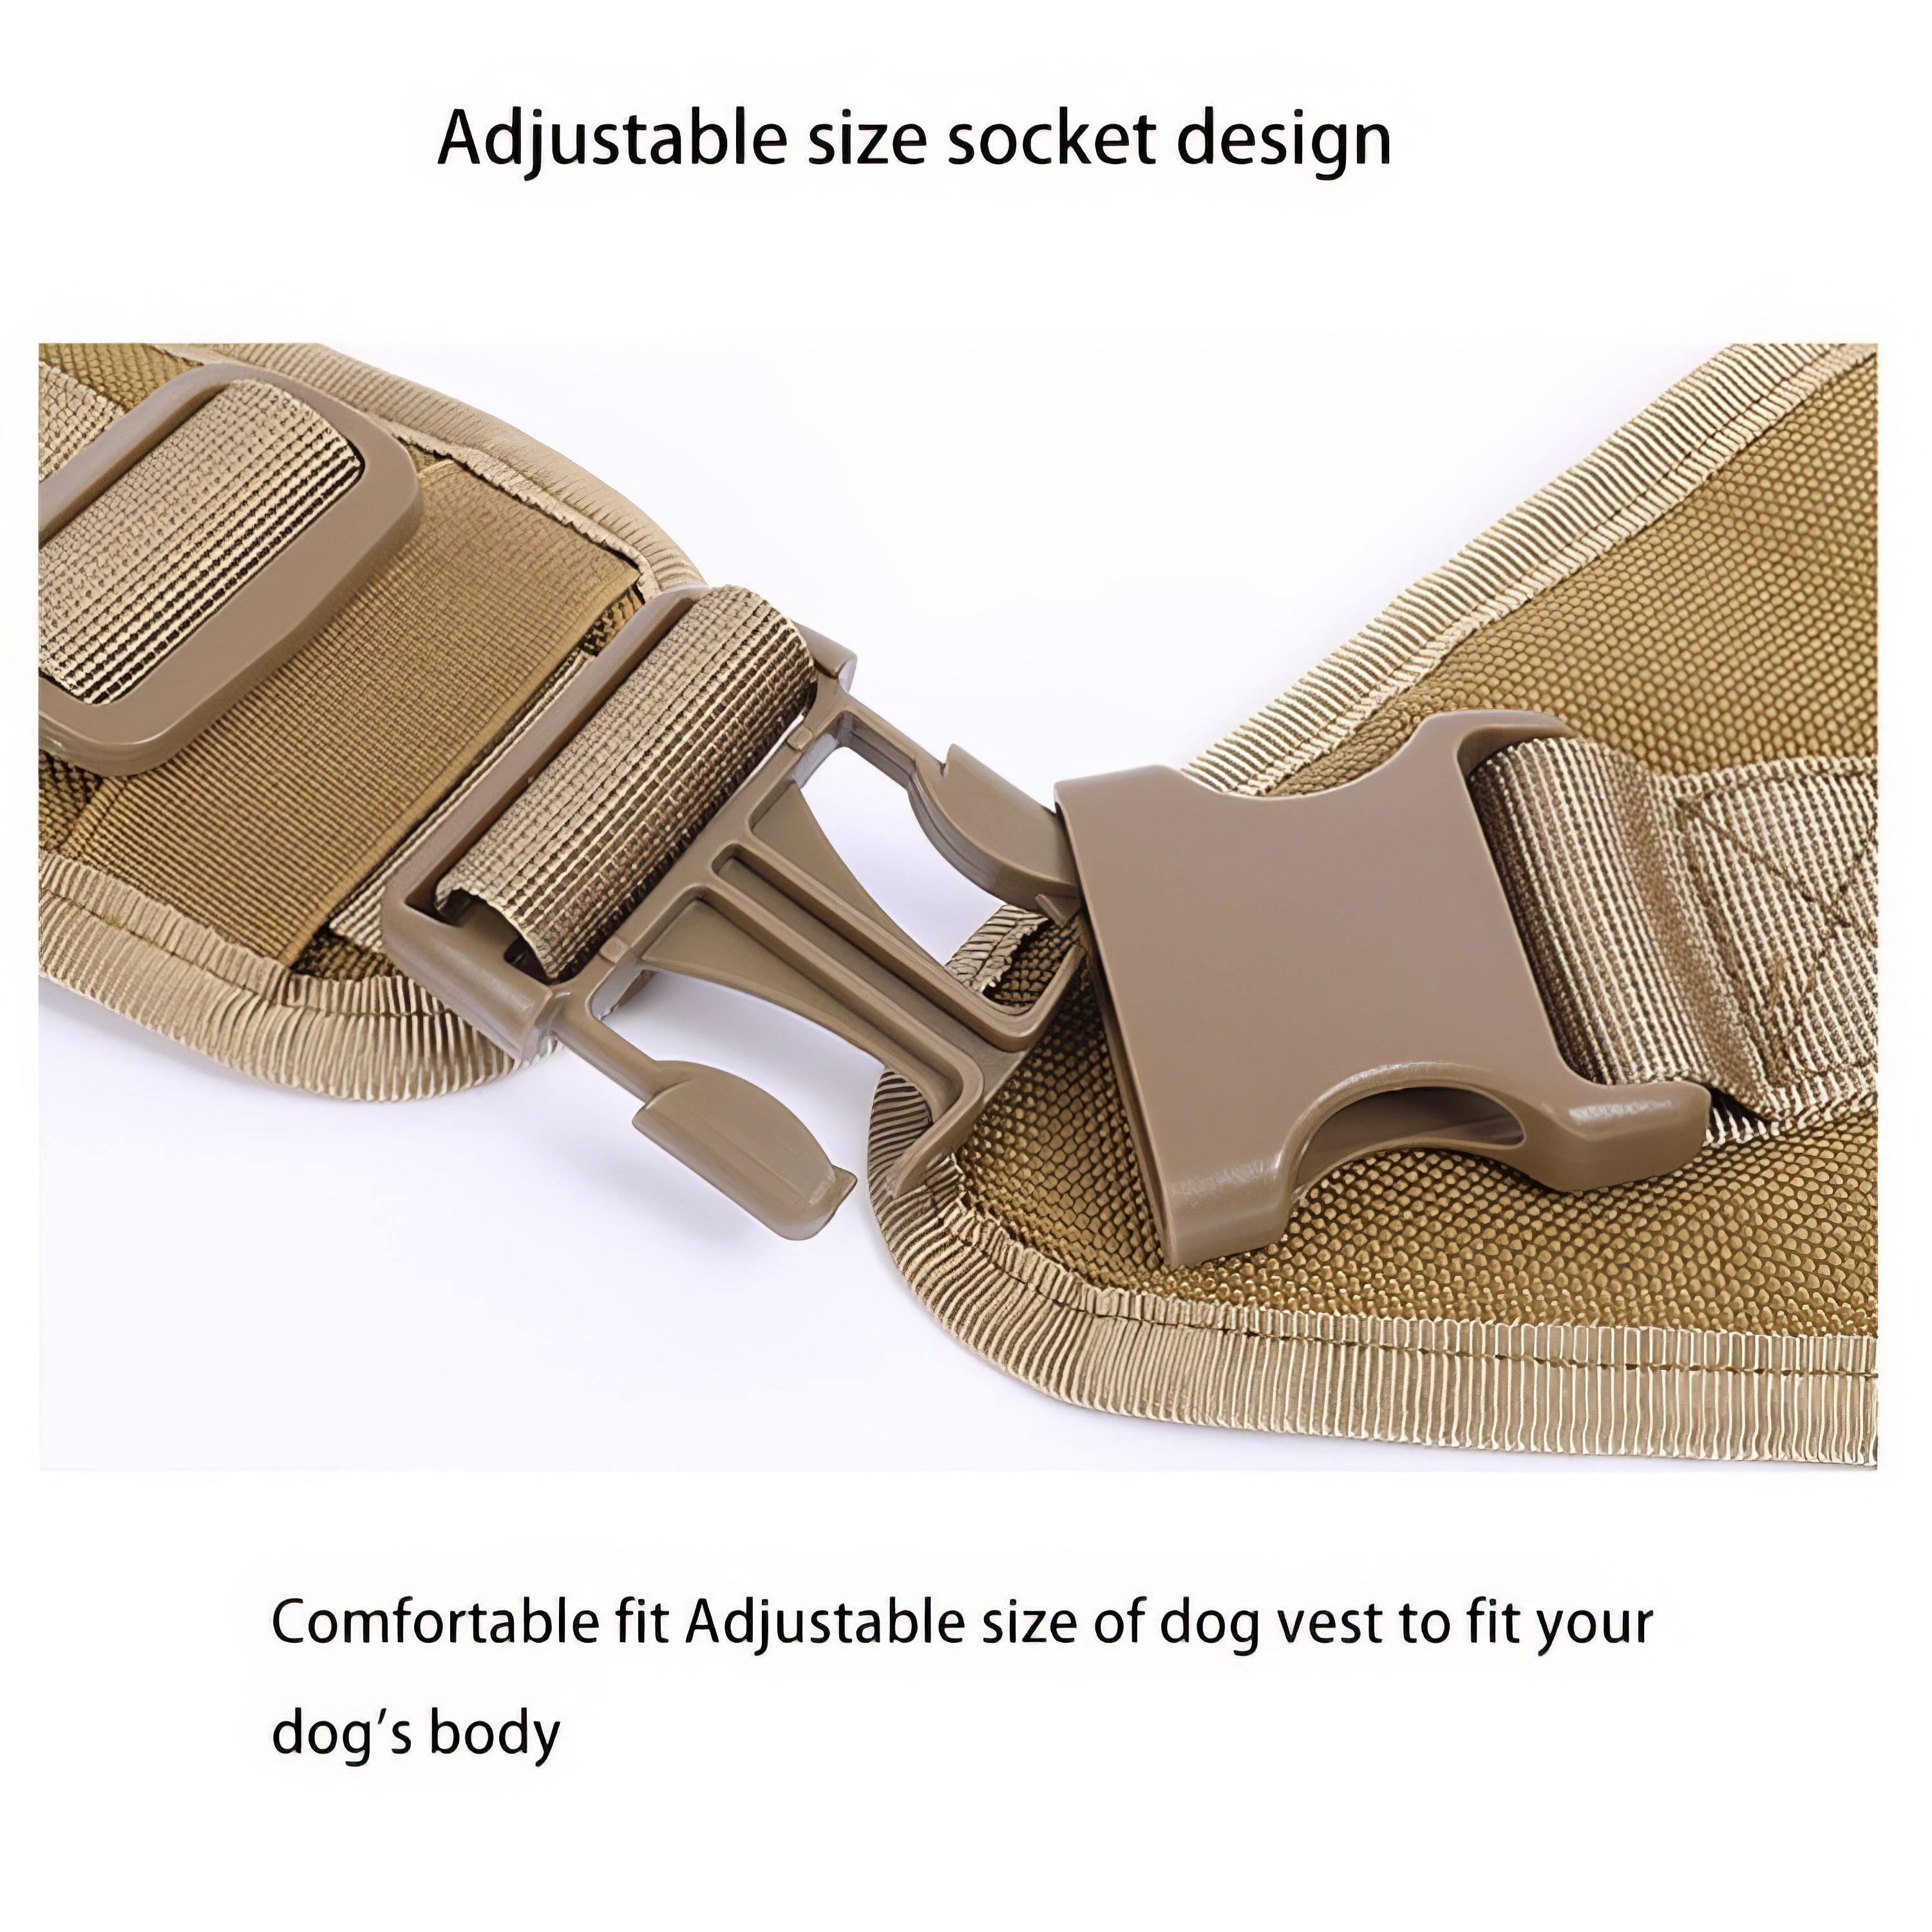 No Pull Dog Harness - Safety & Comfort for Walking Dogs